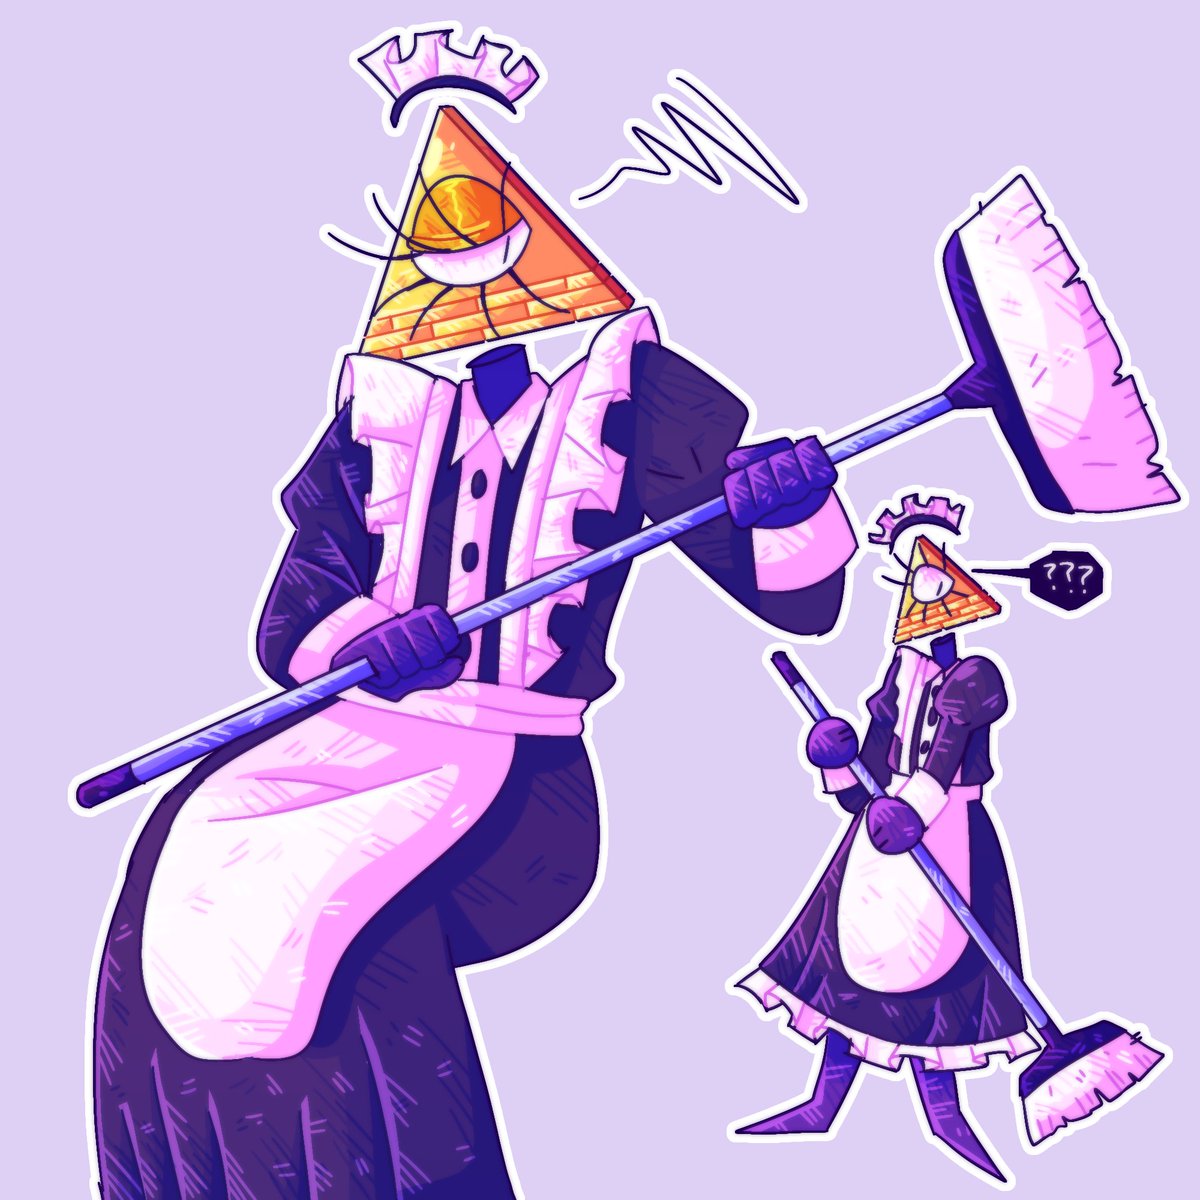 [225] What a peculiar outfit! #billcipher